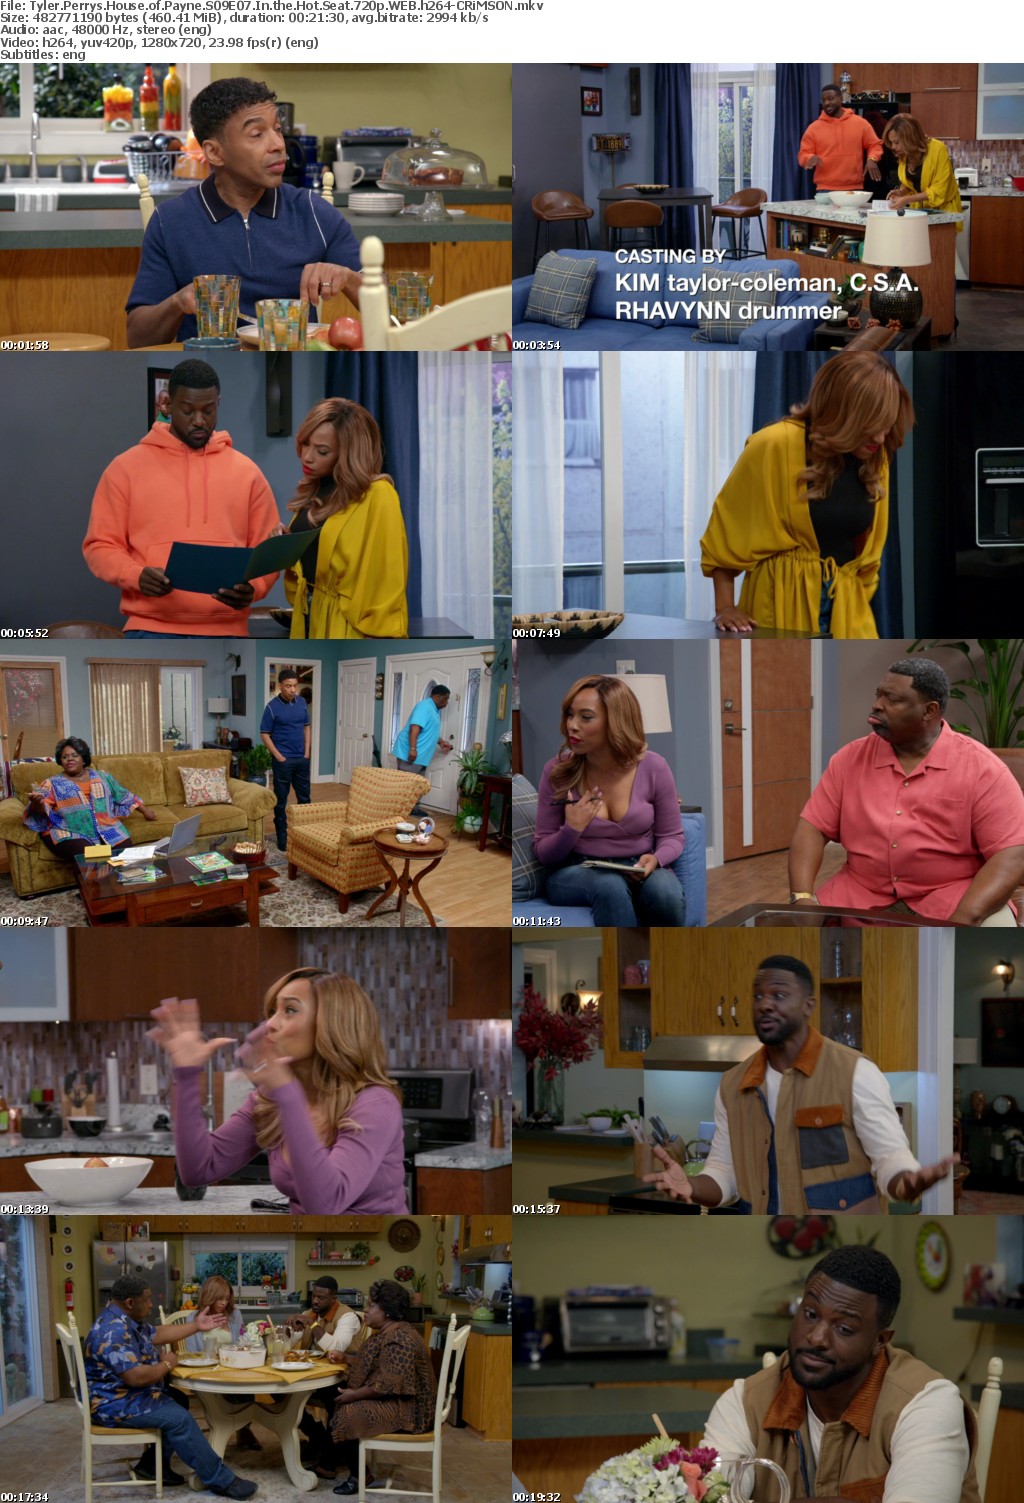 Tyler Perrys House of Payne S09E07 In the Hot Seat 720p WEB h264-CRiMSON